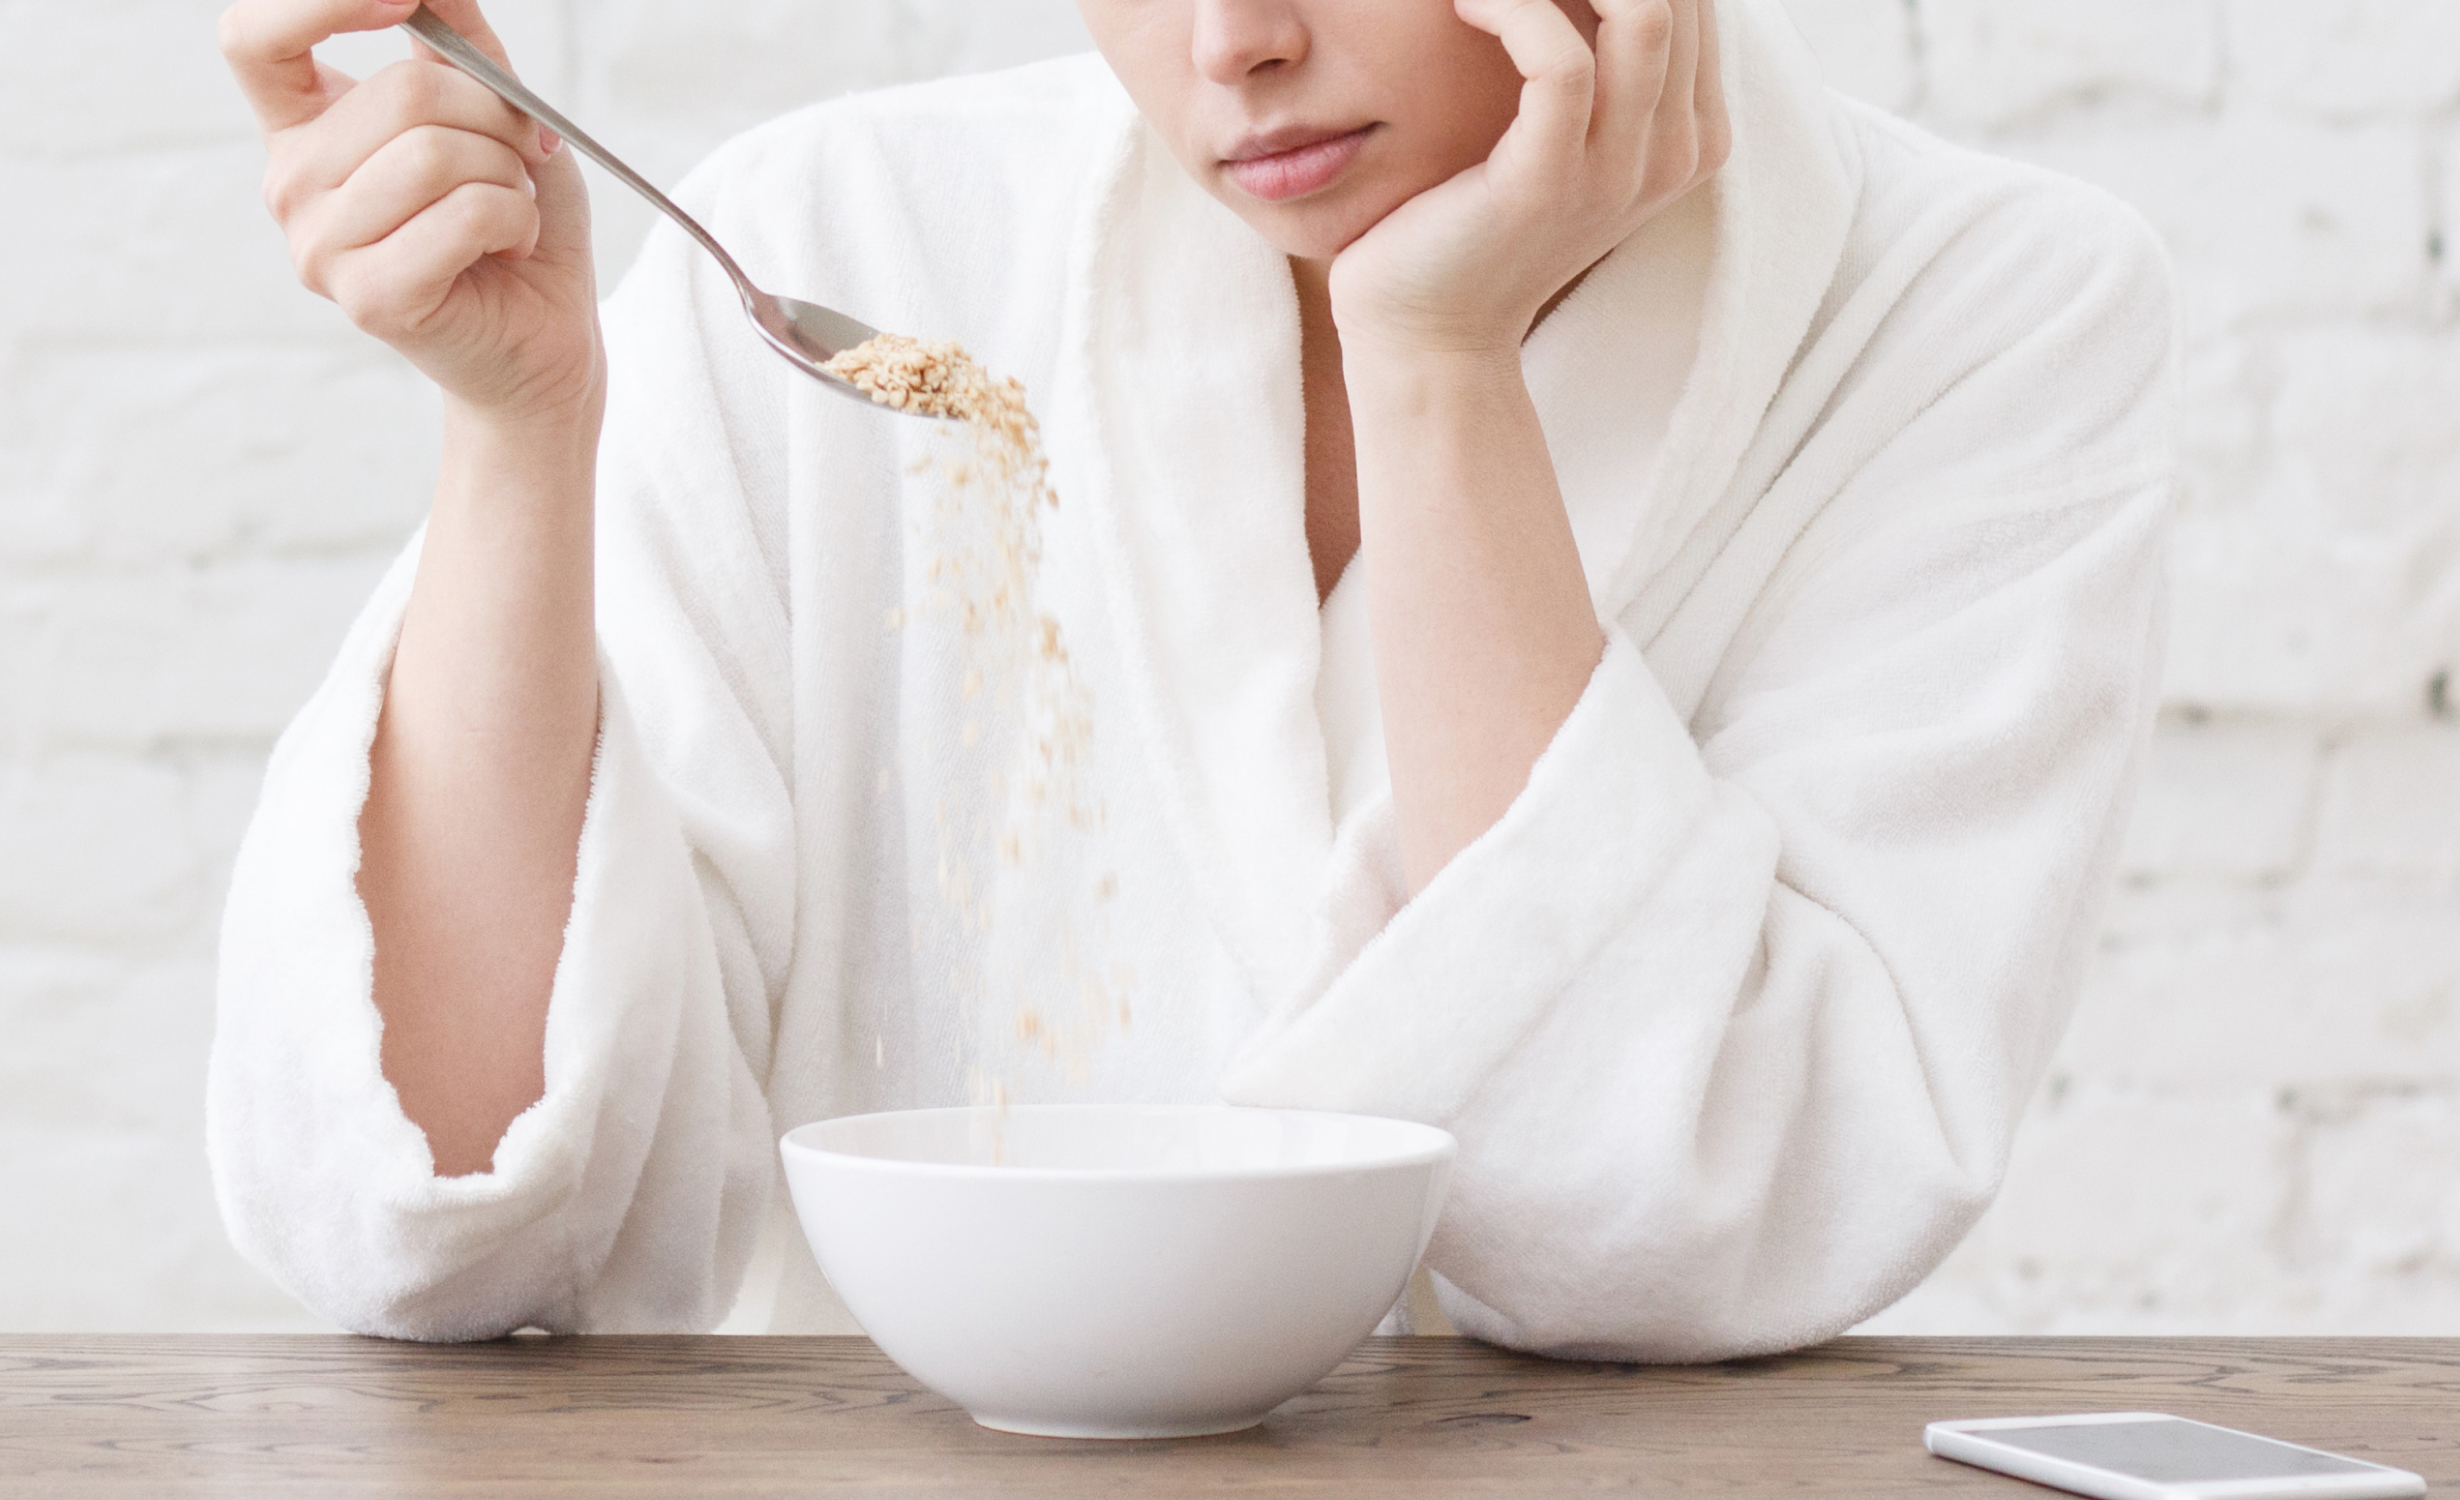 A person in a white robe sitting at a table, looking disinterested as they slowly pour cereal into a bowl, illustrating symptoms of loss of appetite conditions.